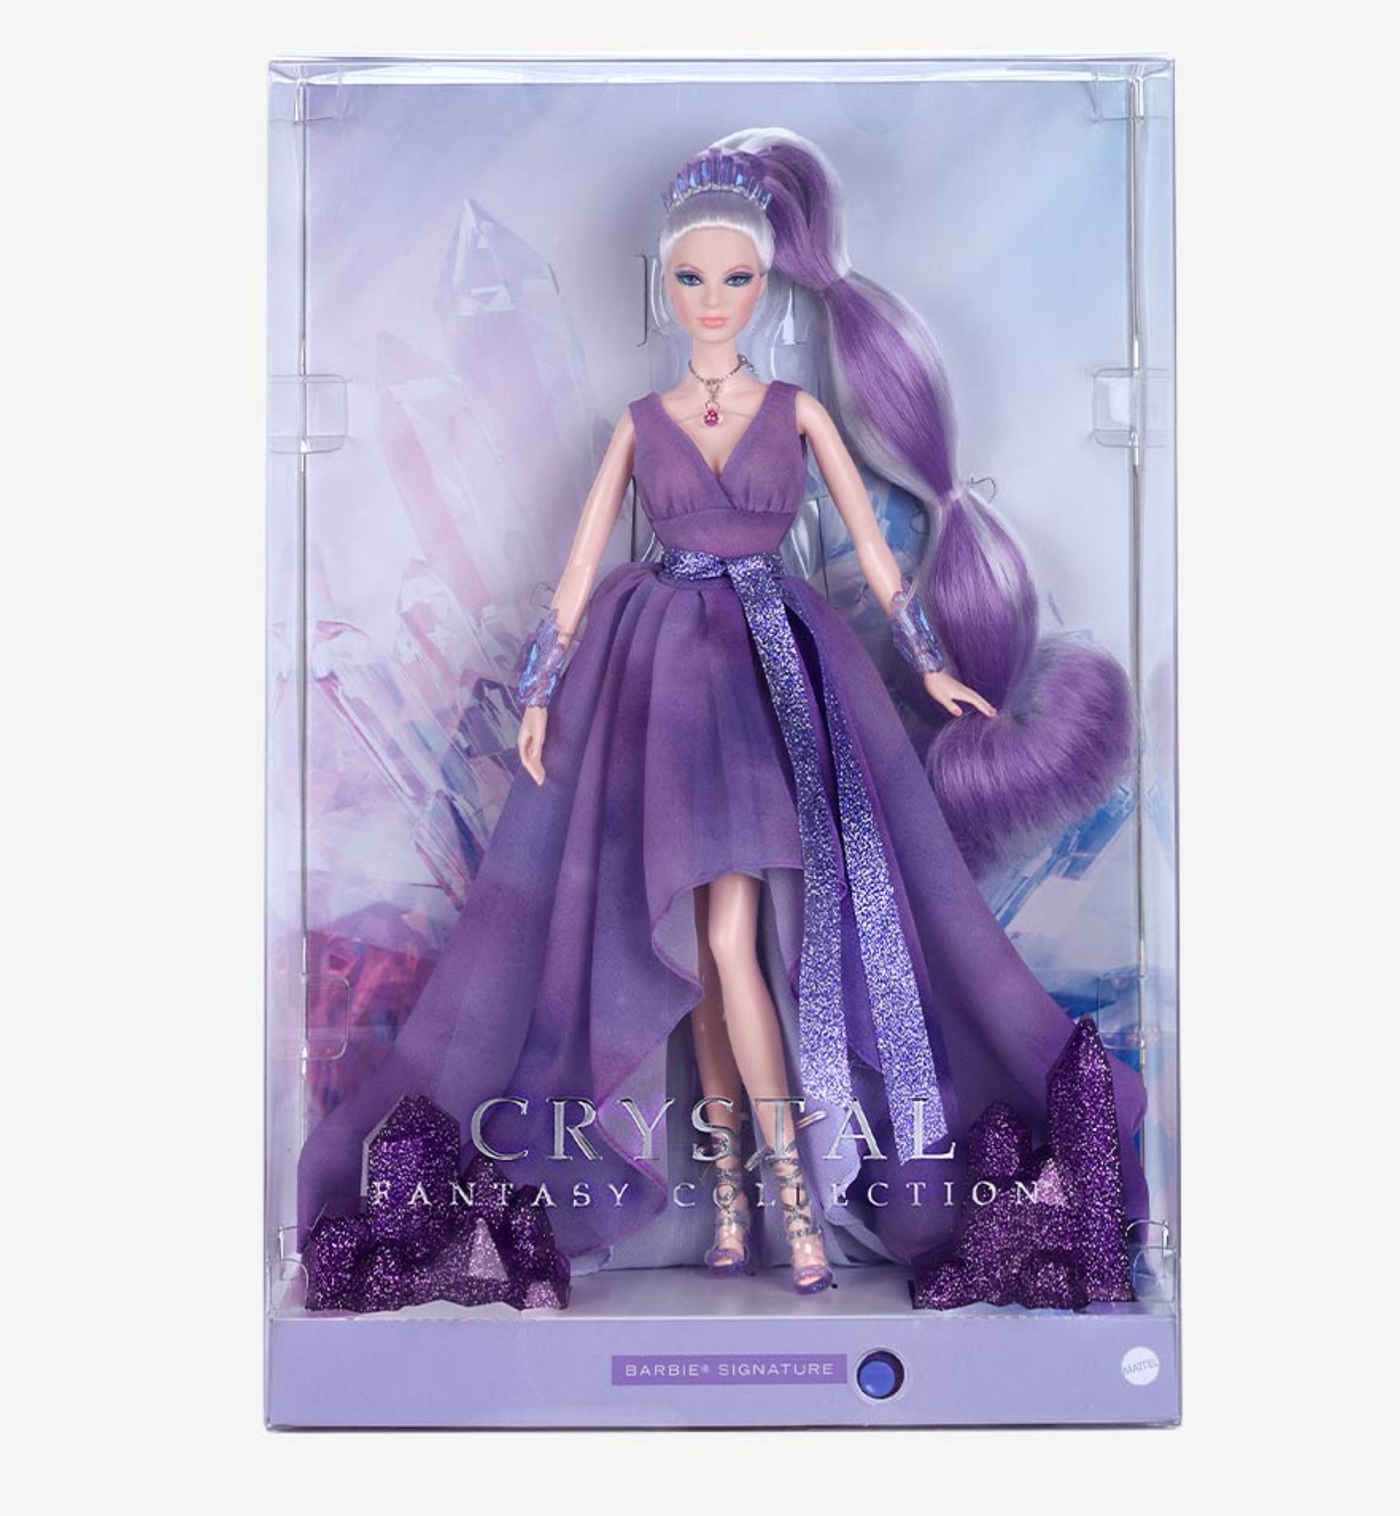 Mattel Creations Barbie Signature Crystal Fantasy Collection Doll New with Box